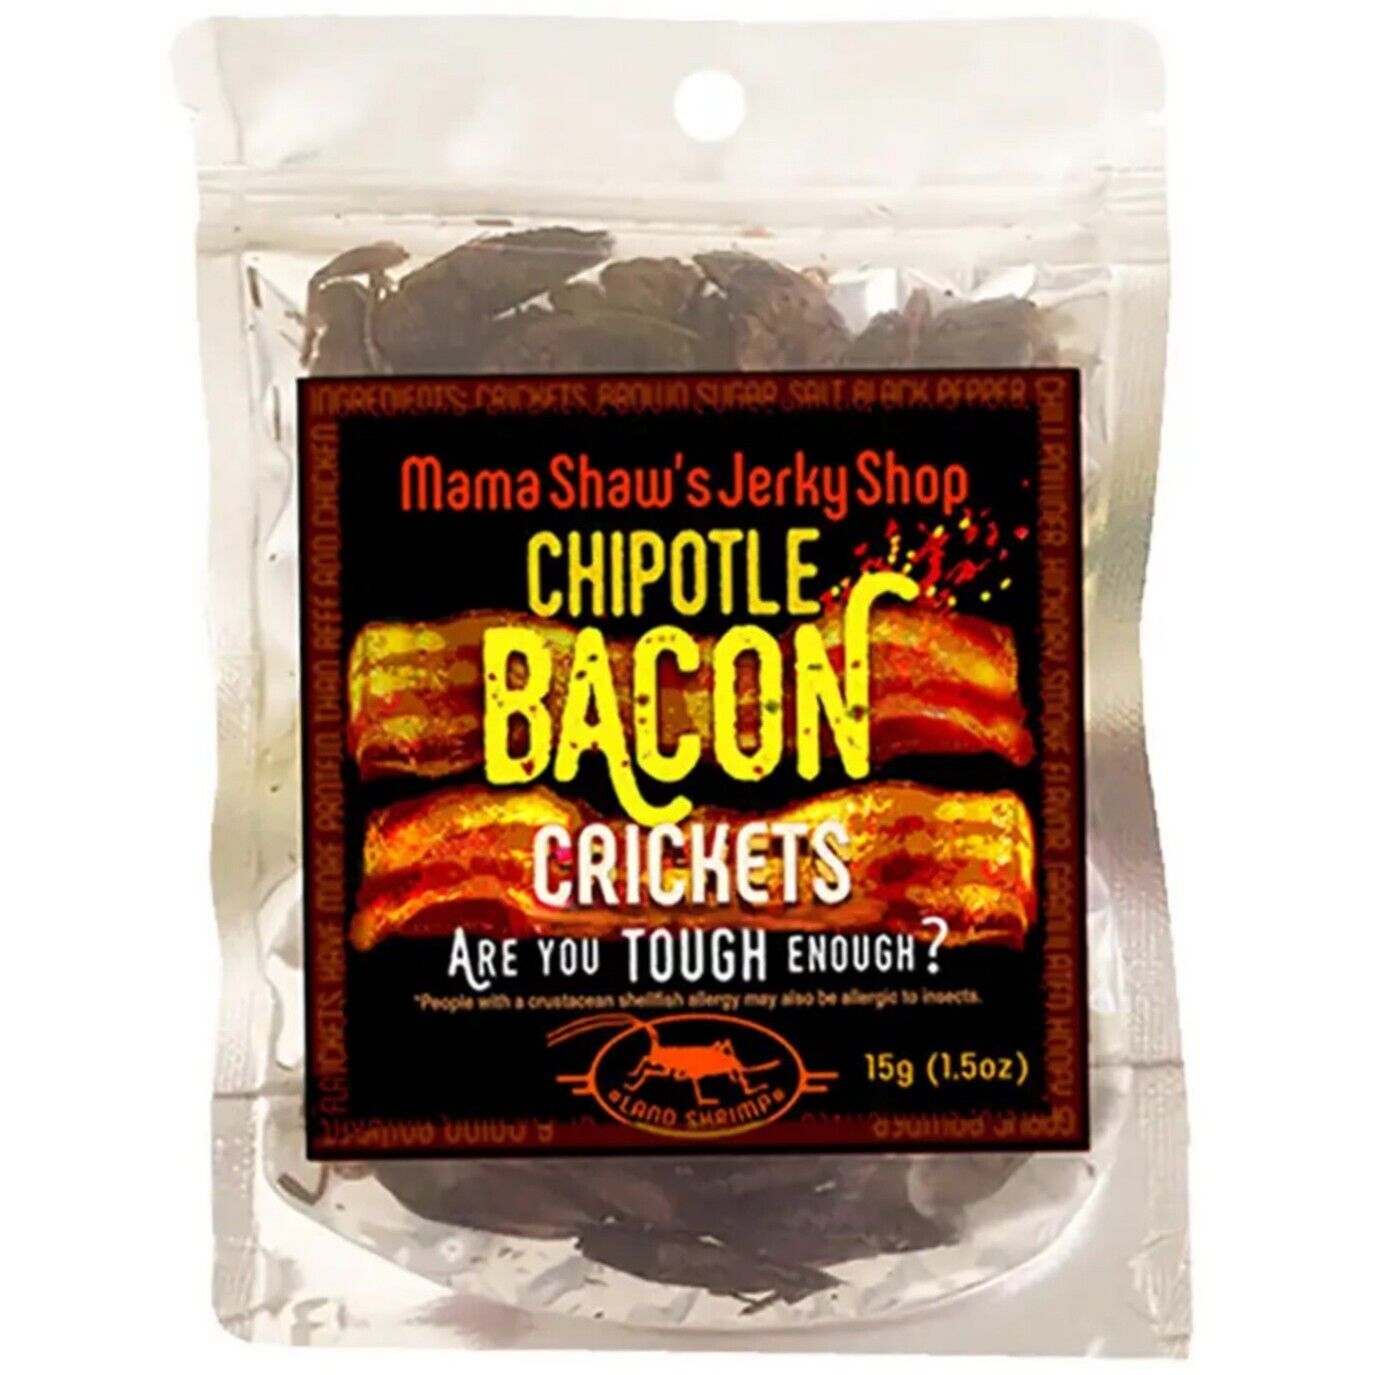 CRICKETS Chipotle Bacon flavor edible insects bred for human consumption